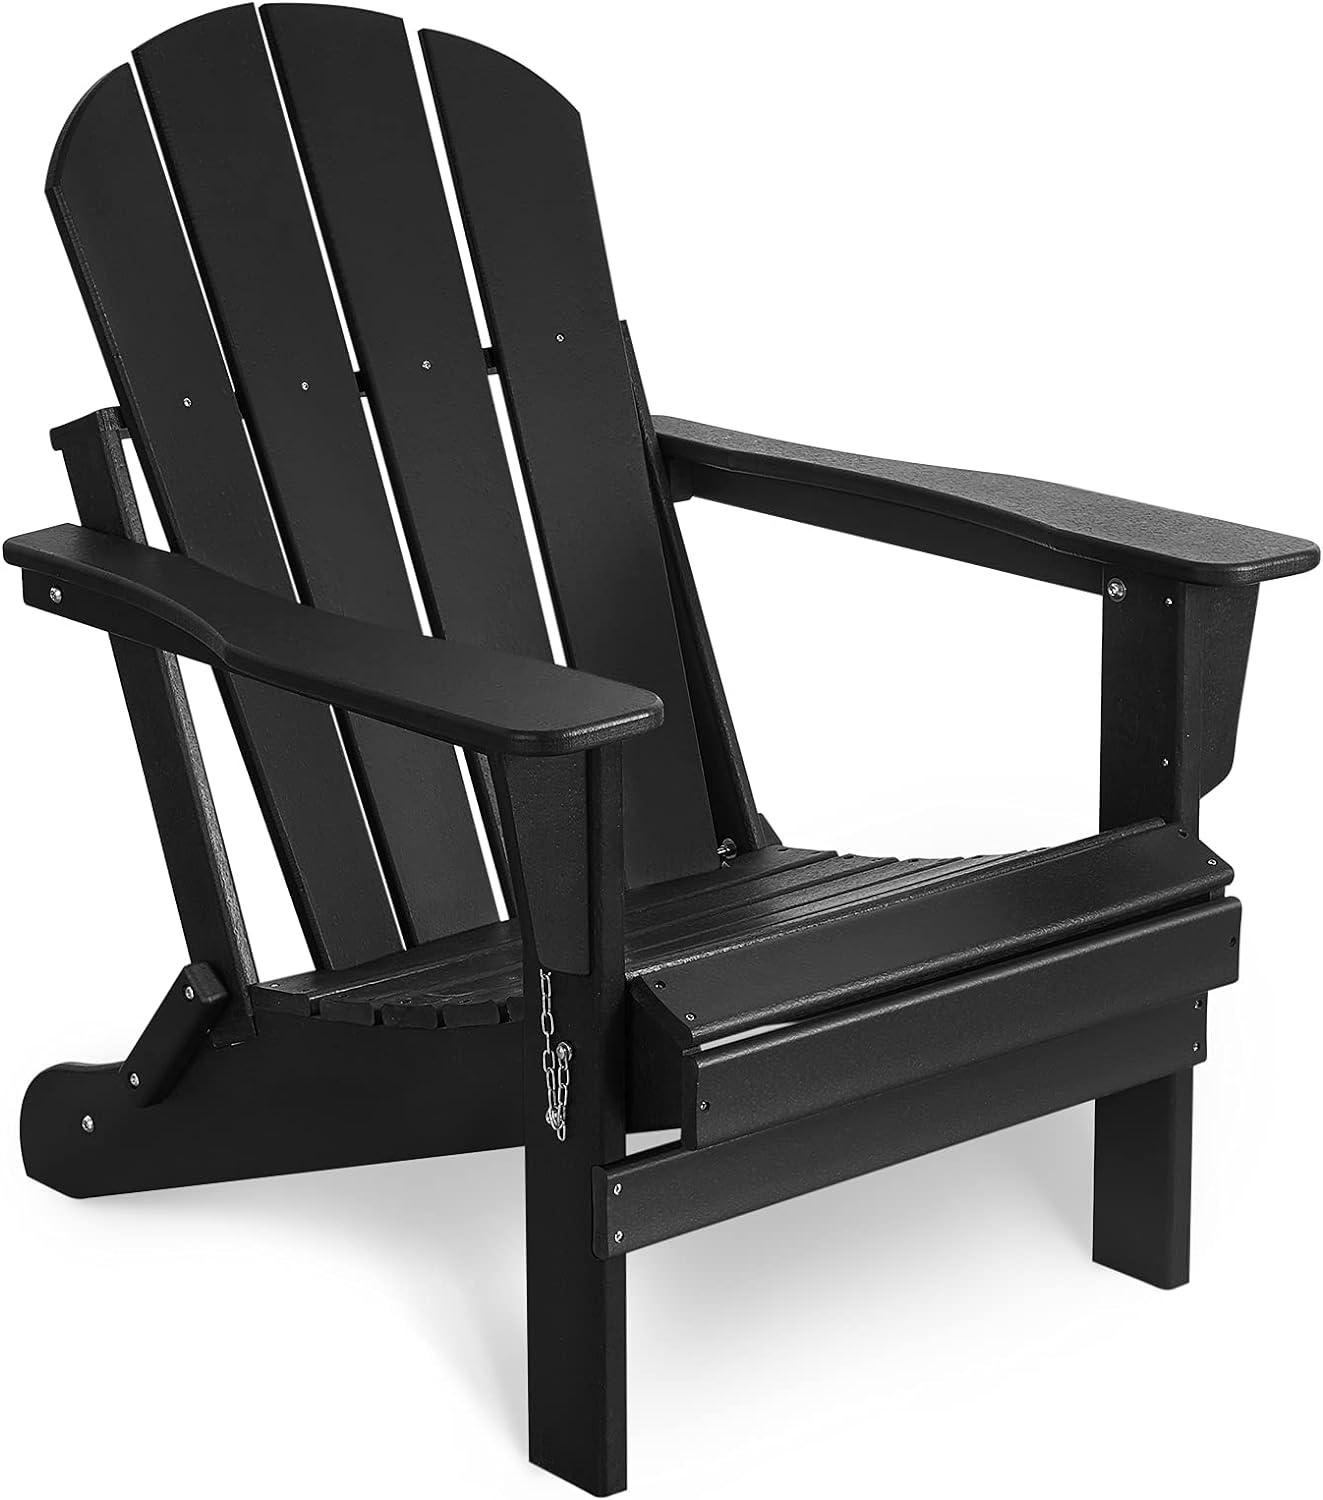 WILLIAMSPACE Folding Adirondack Chair Outdoor, Weather Resistant Patio Chairs for Garden Deck Backyard, Easy Maintenance & Classic Adirondack Chairs Design - Black